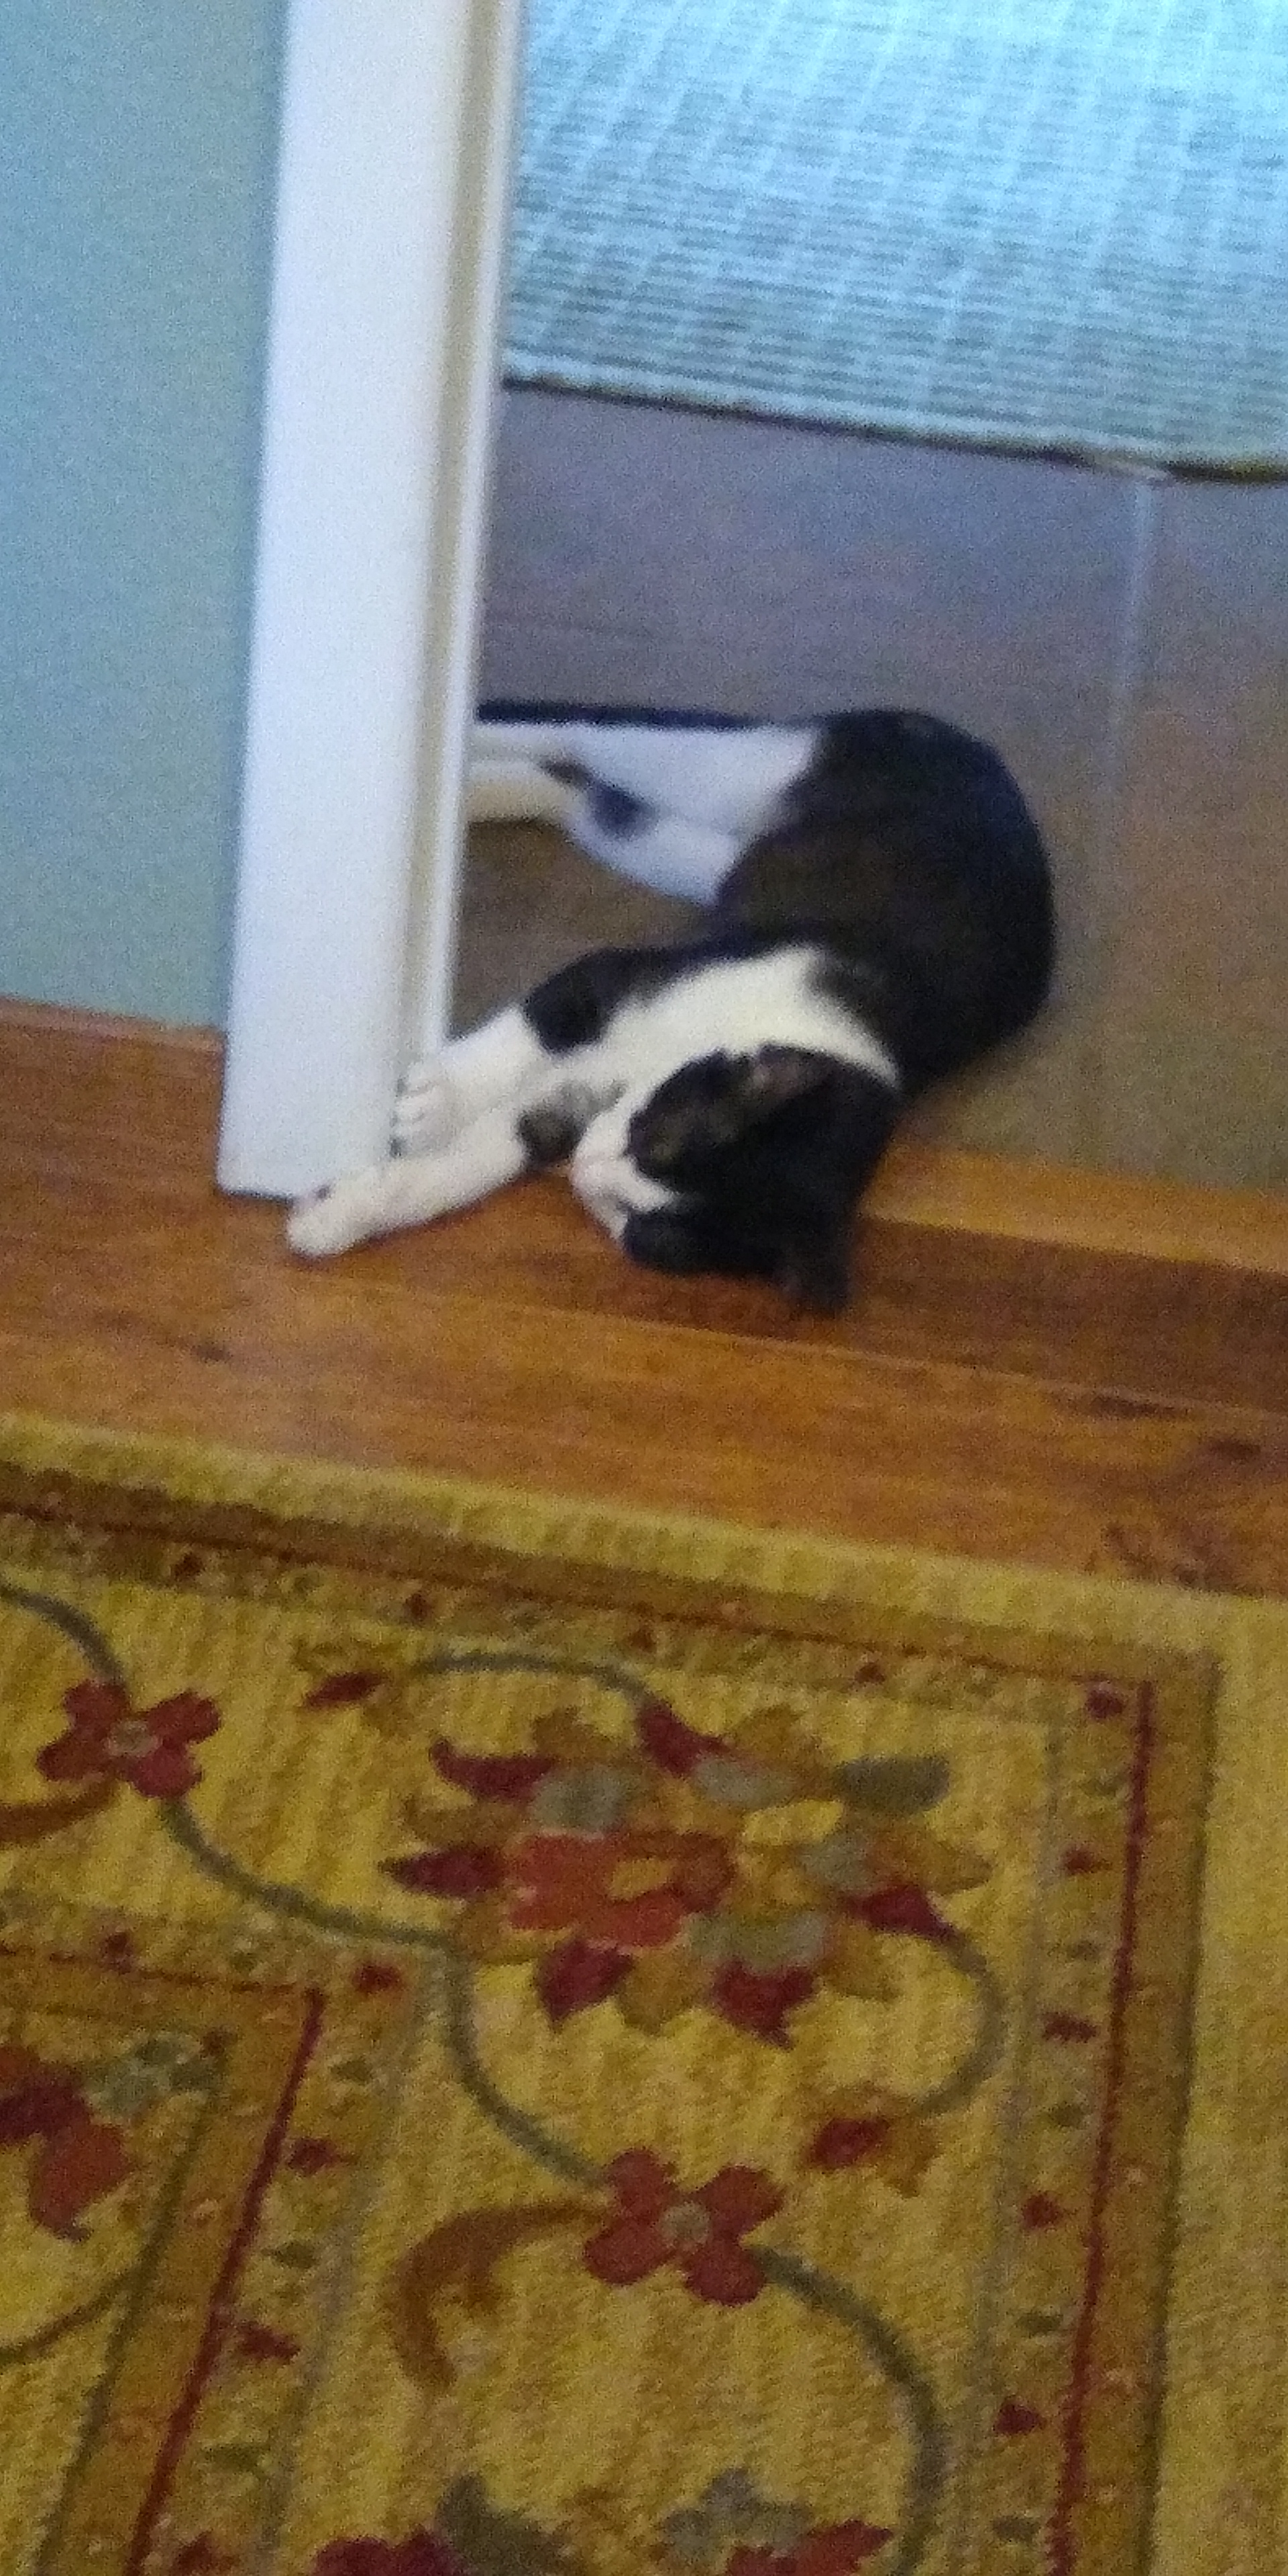 A photo of a black-and-white cat laying on a tile floor, in a doorframe. She is laying in a silly manner with her paws on the doorframe. End ID.